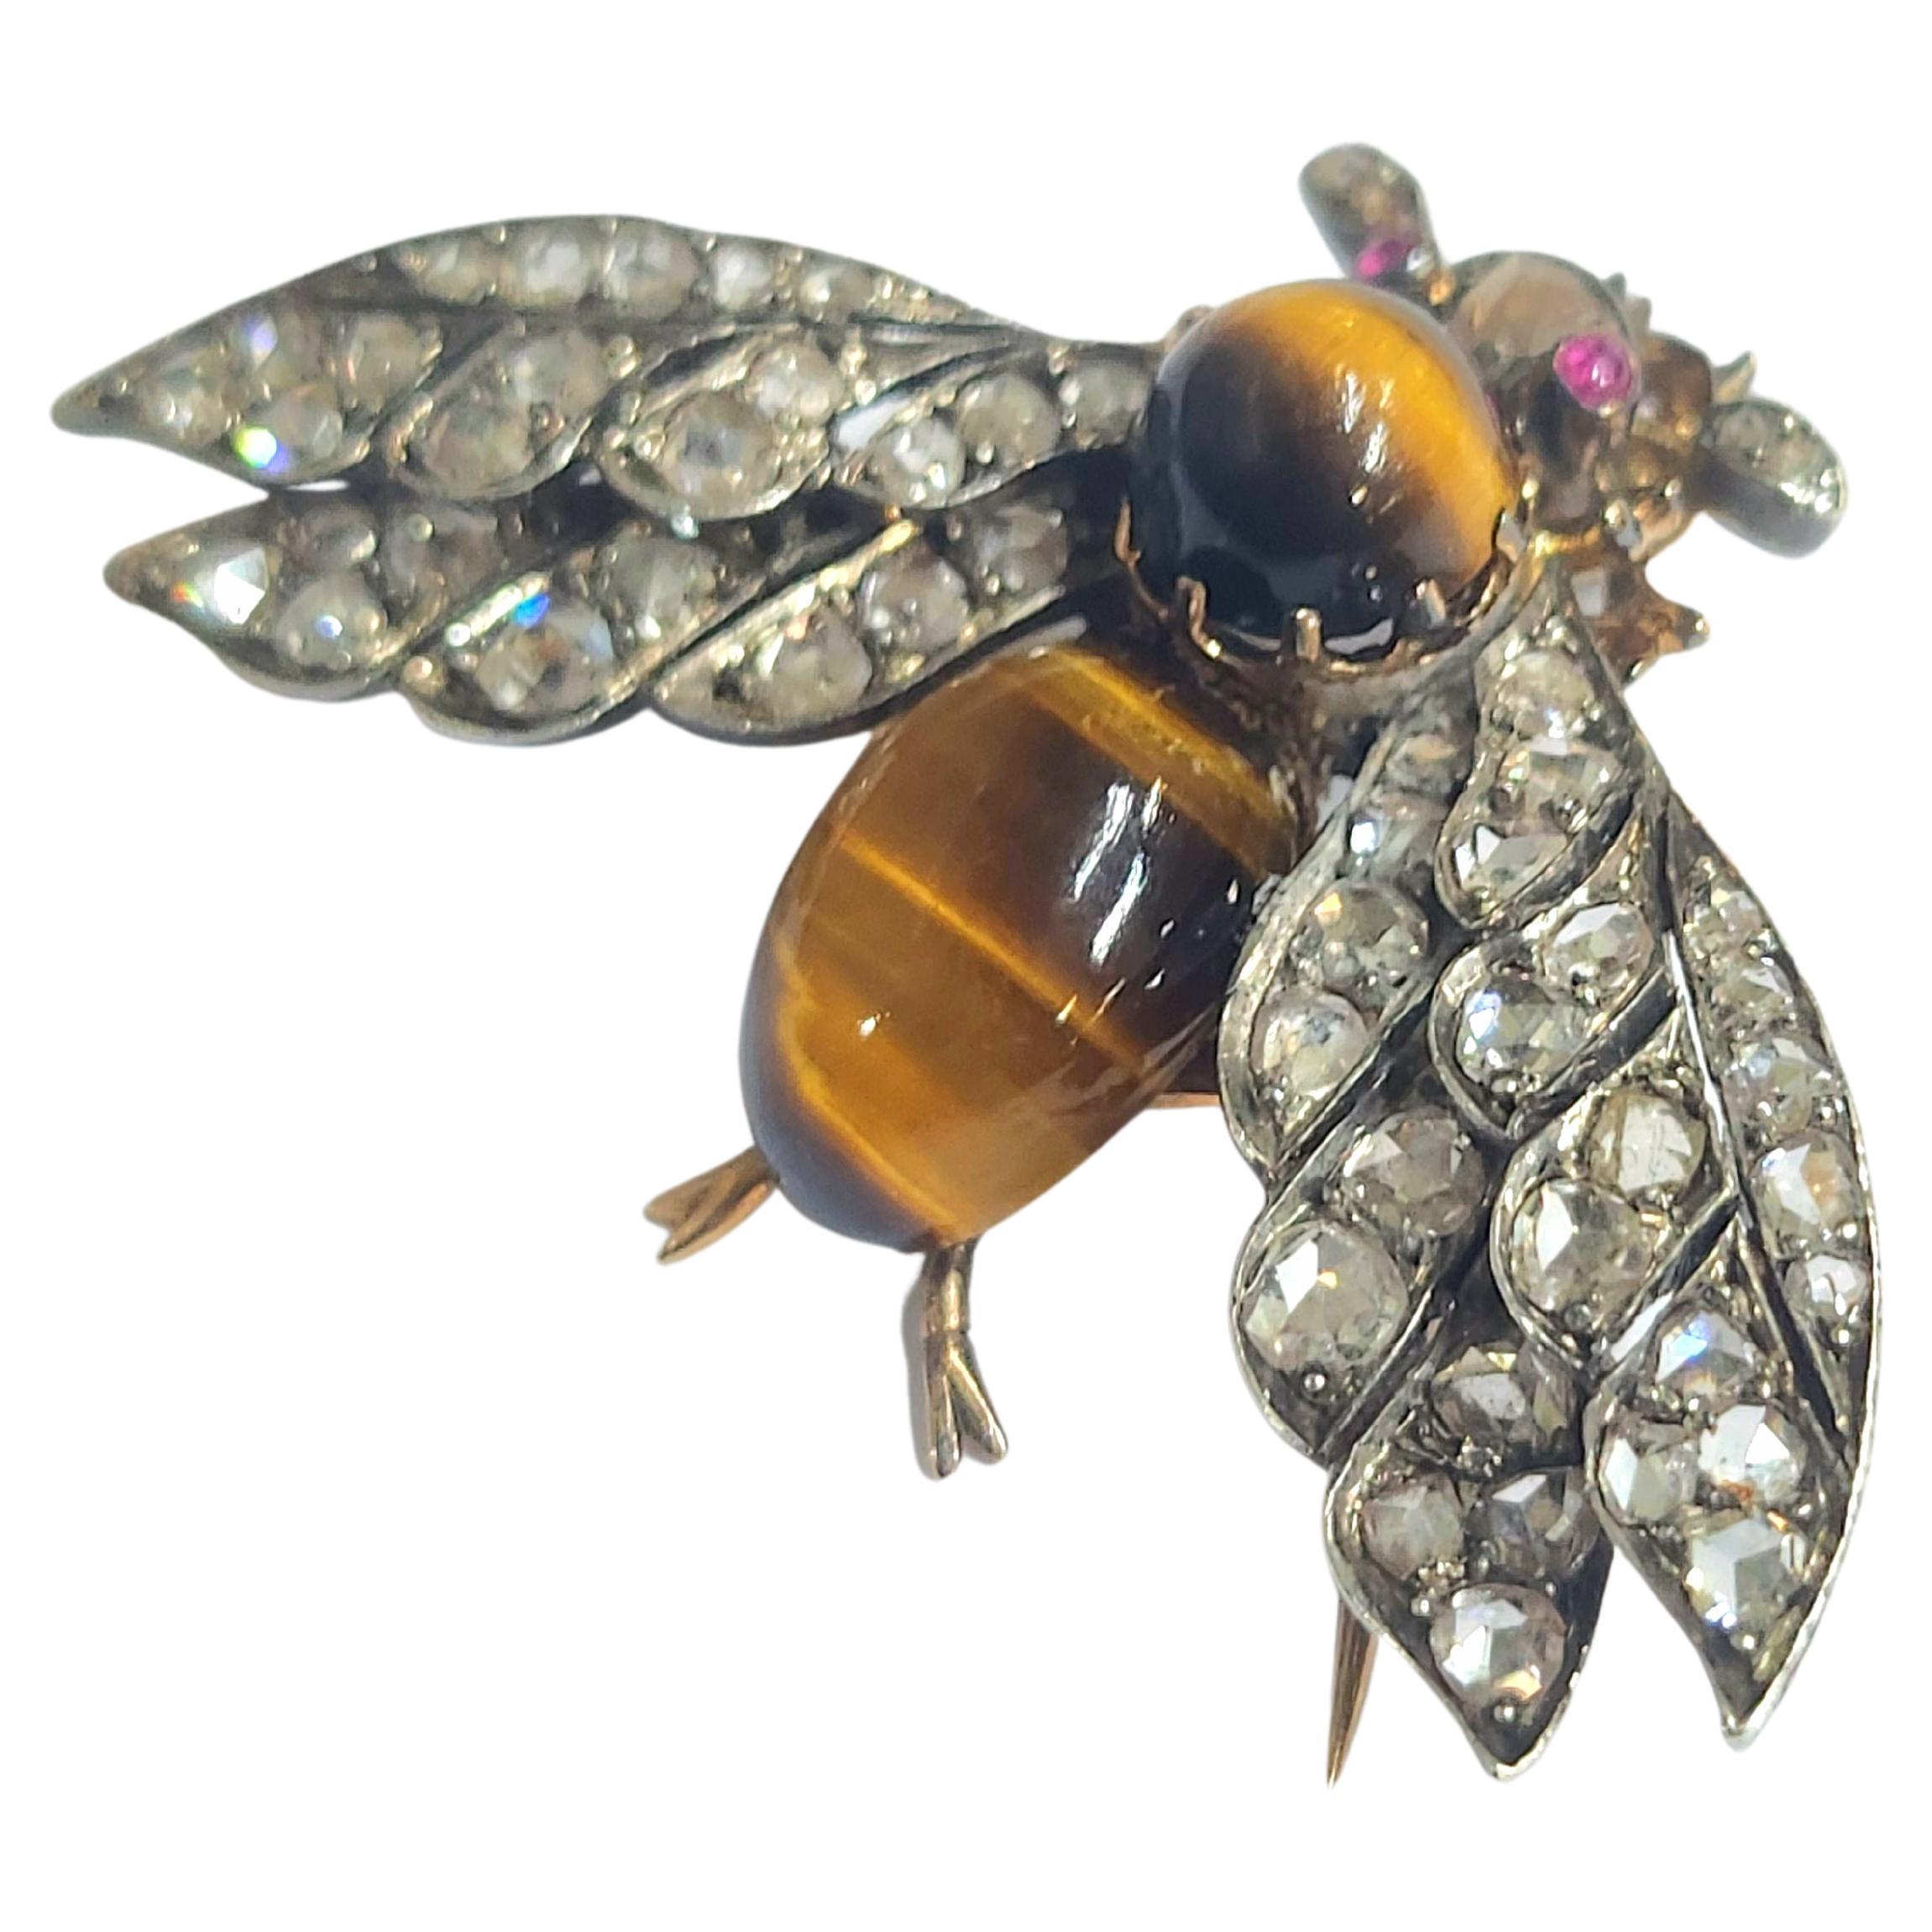 Antique victorian era 1880.c fly brooch centered with tiger eye stones and rose cut diamonds in gold setting topped with silver brooch weidth 4.5 cm with an estimate diamond weight 1.5 carats 